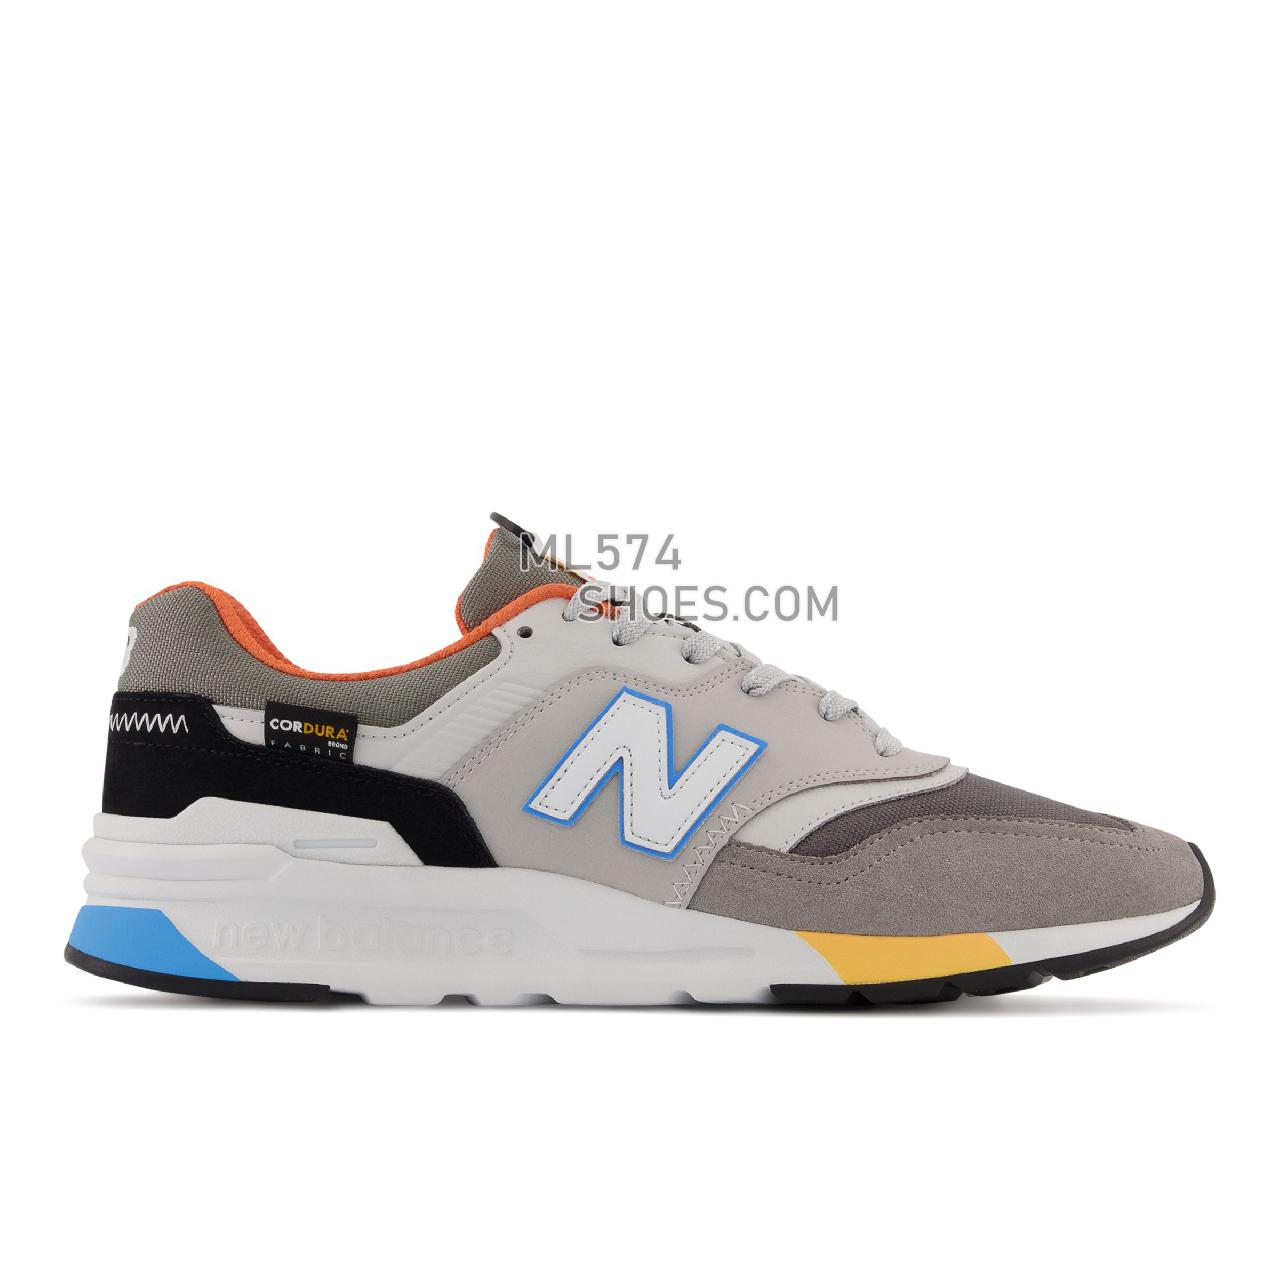 New Balance 997H - Men's Sport Style Sneakers - Marblehead with Black - CM997HTH